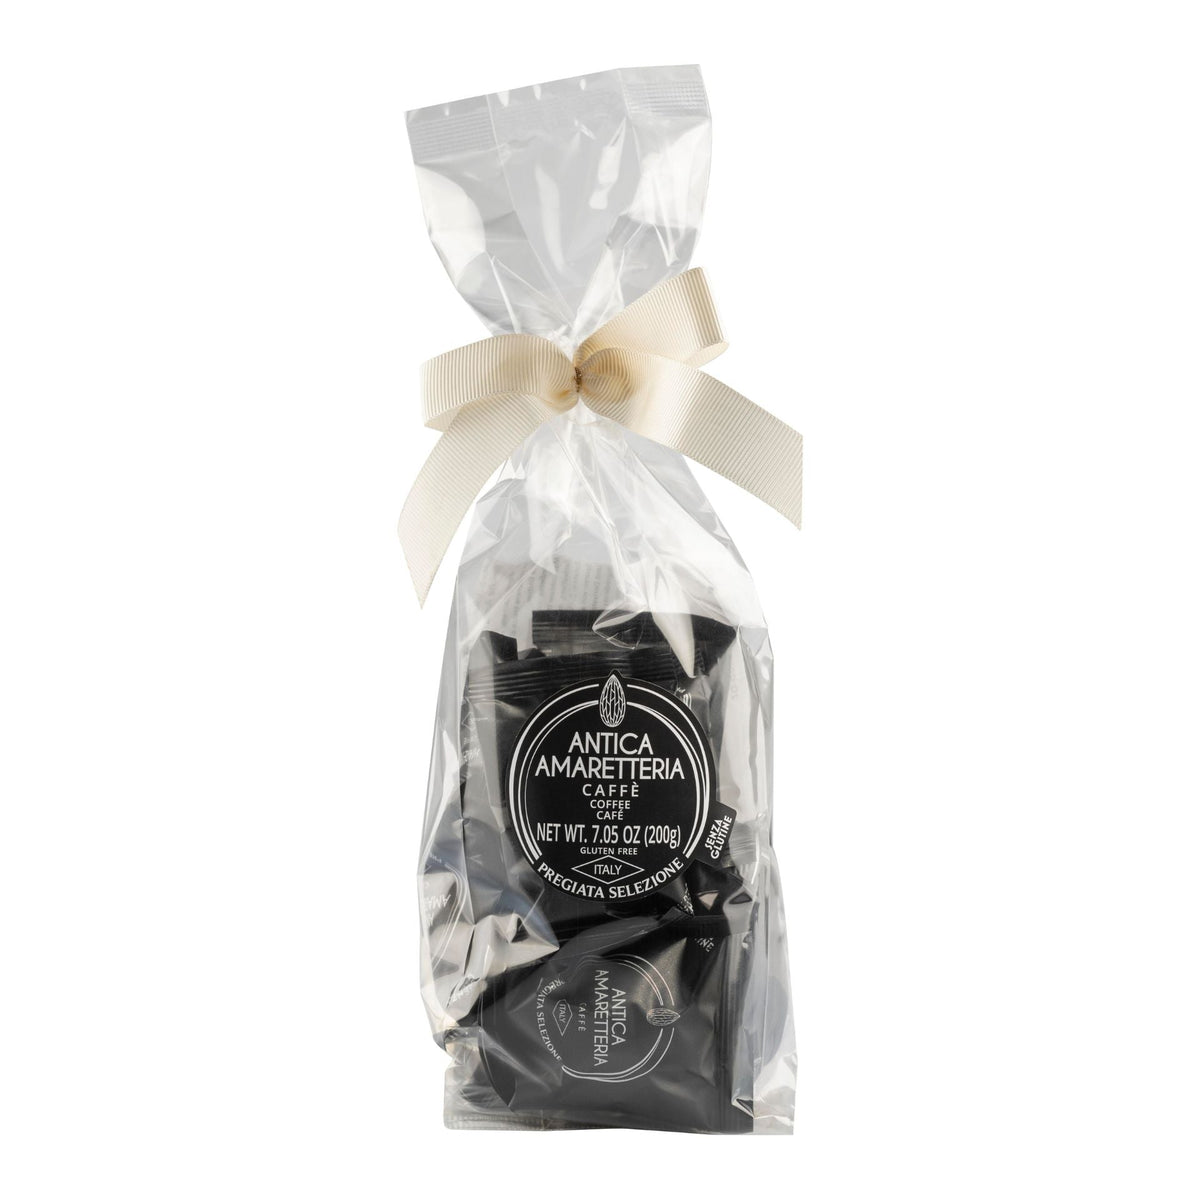 Antica Amaretteria Soft Coffee Amaretti 200g (Bag)  | Imported and distributed in the UK by Just Gourmet Foods